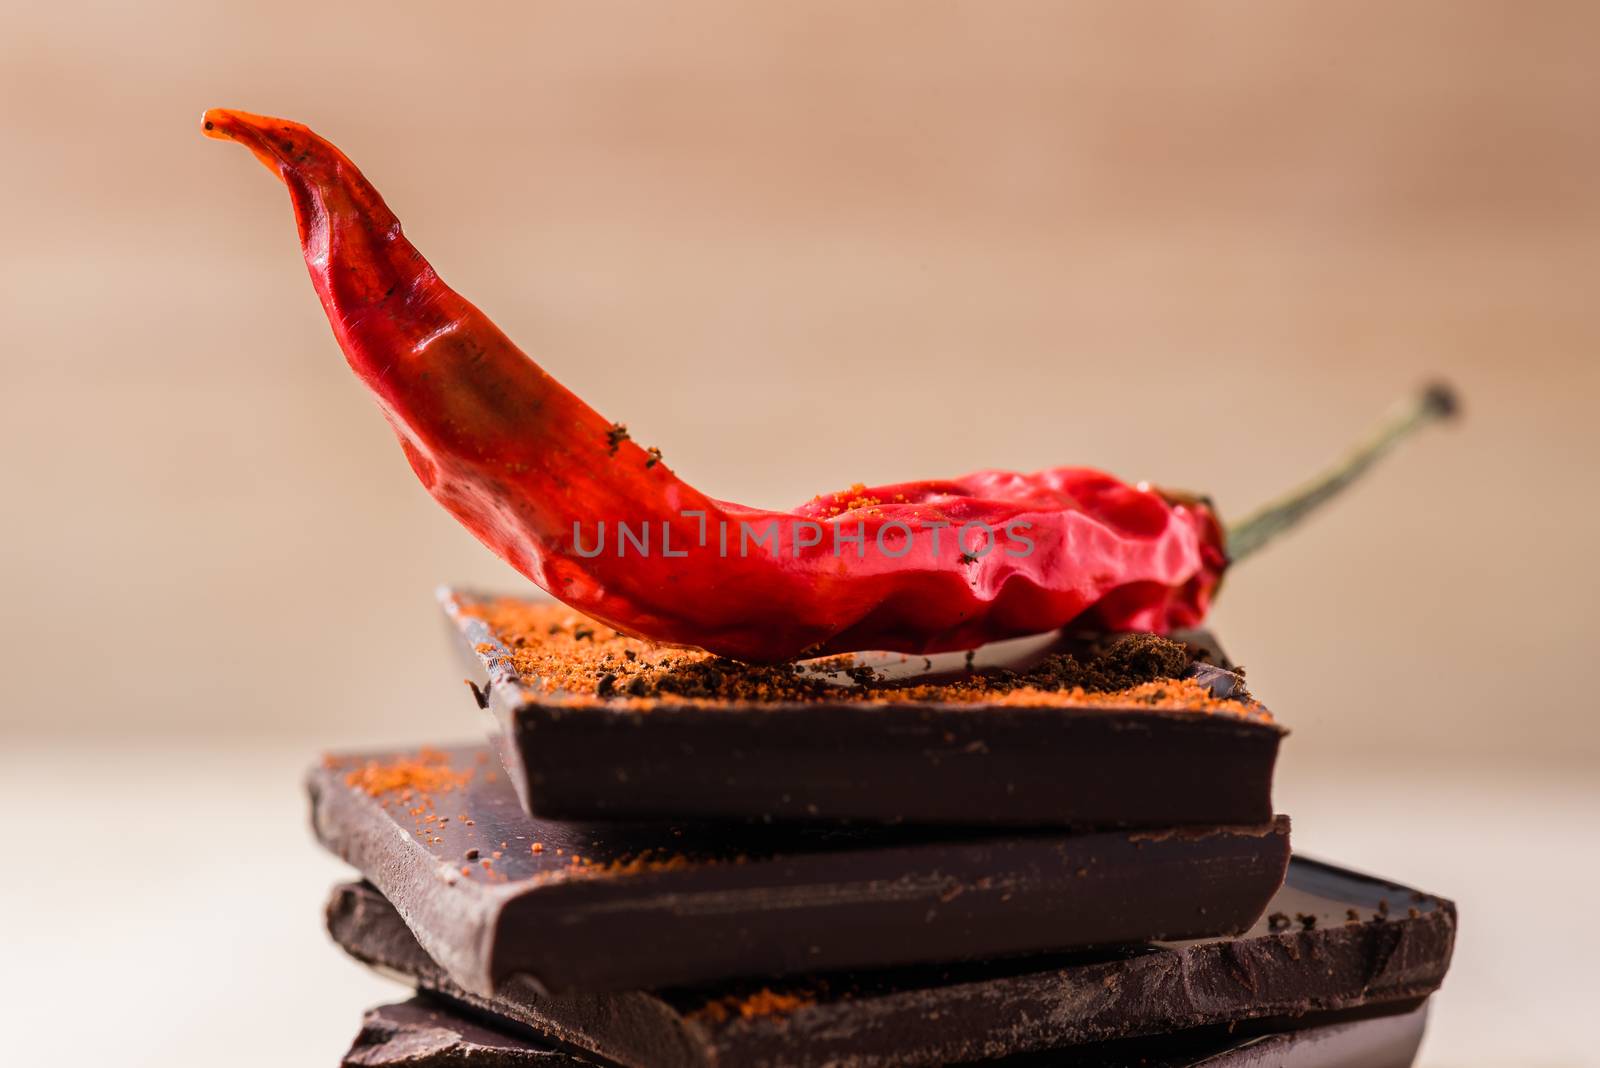 Chili on the chocolate stack by Seva_blsv